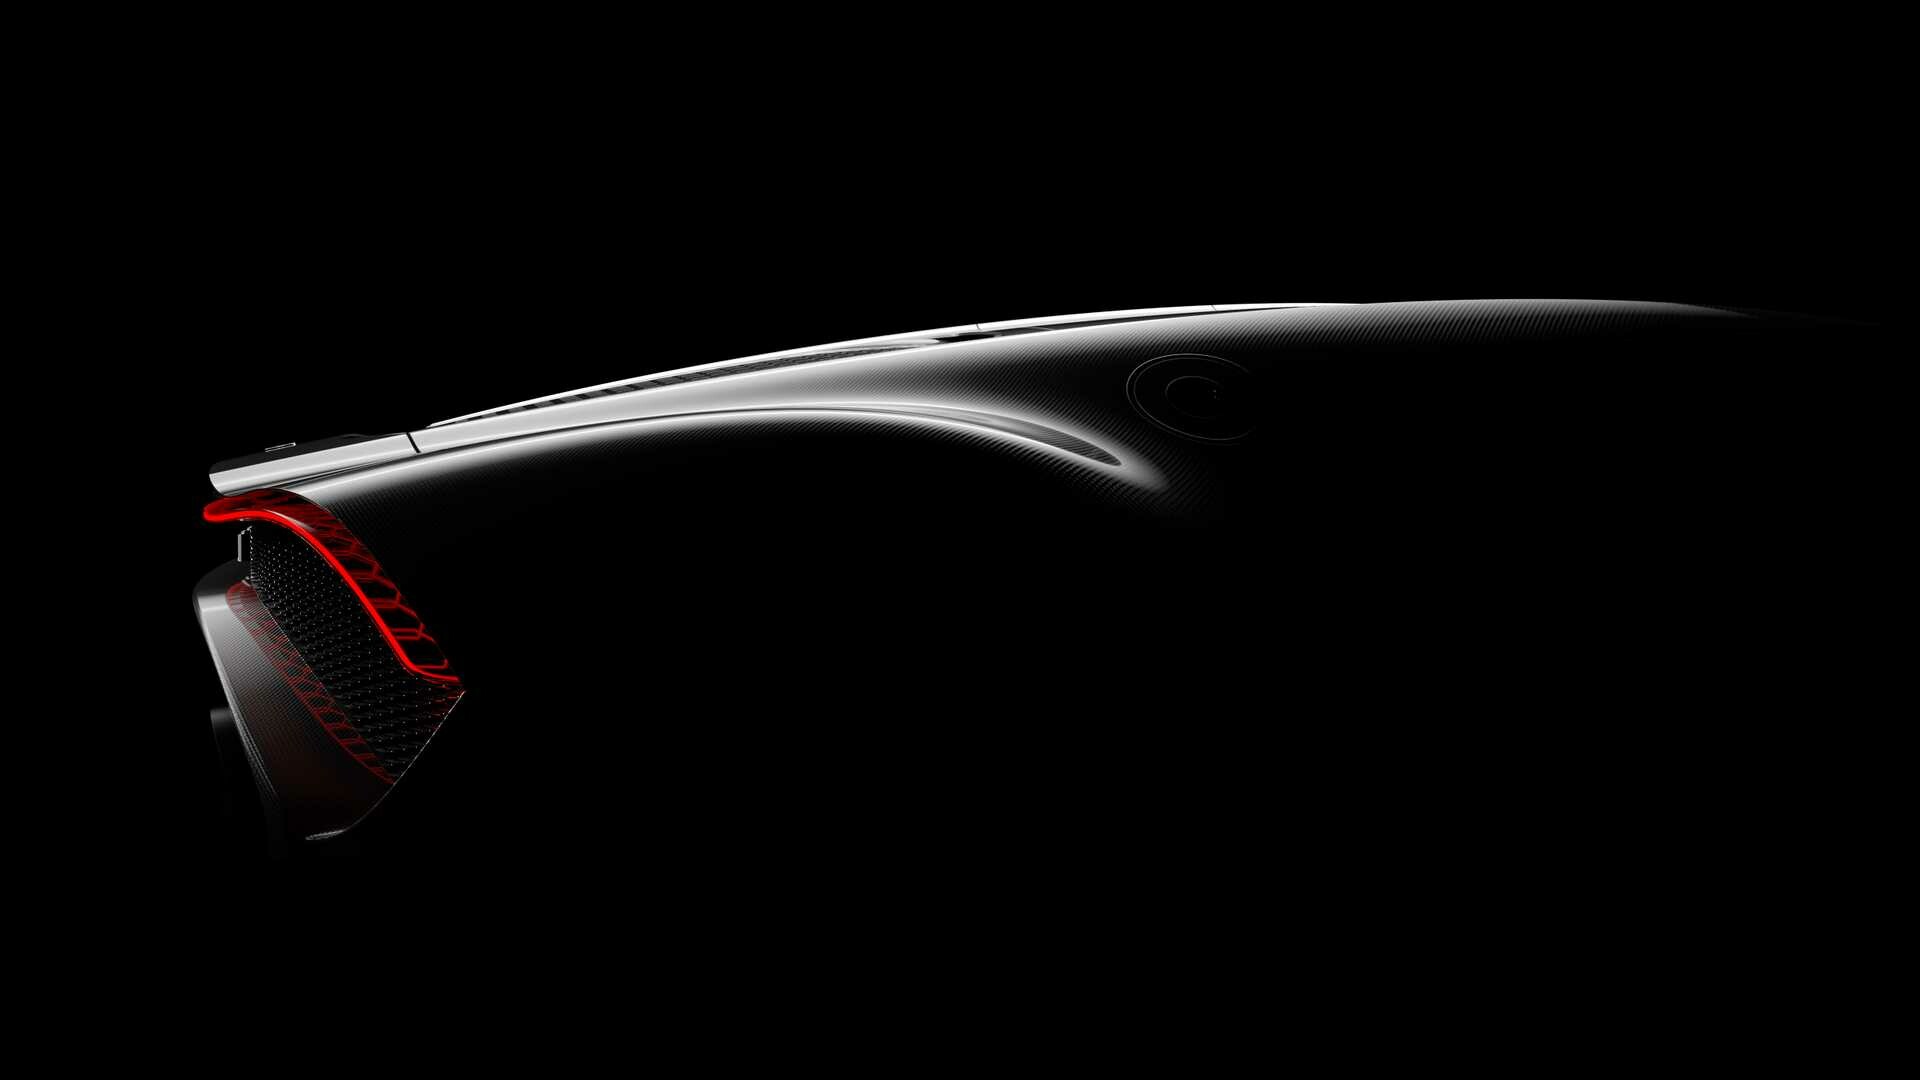 Bugatti La Voiture Noire: The car is built on the same frame used in the Chiron. 1920x1080 Full HD Wallpaper.